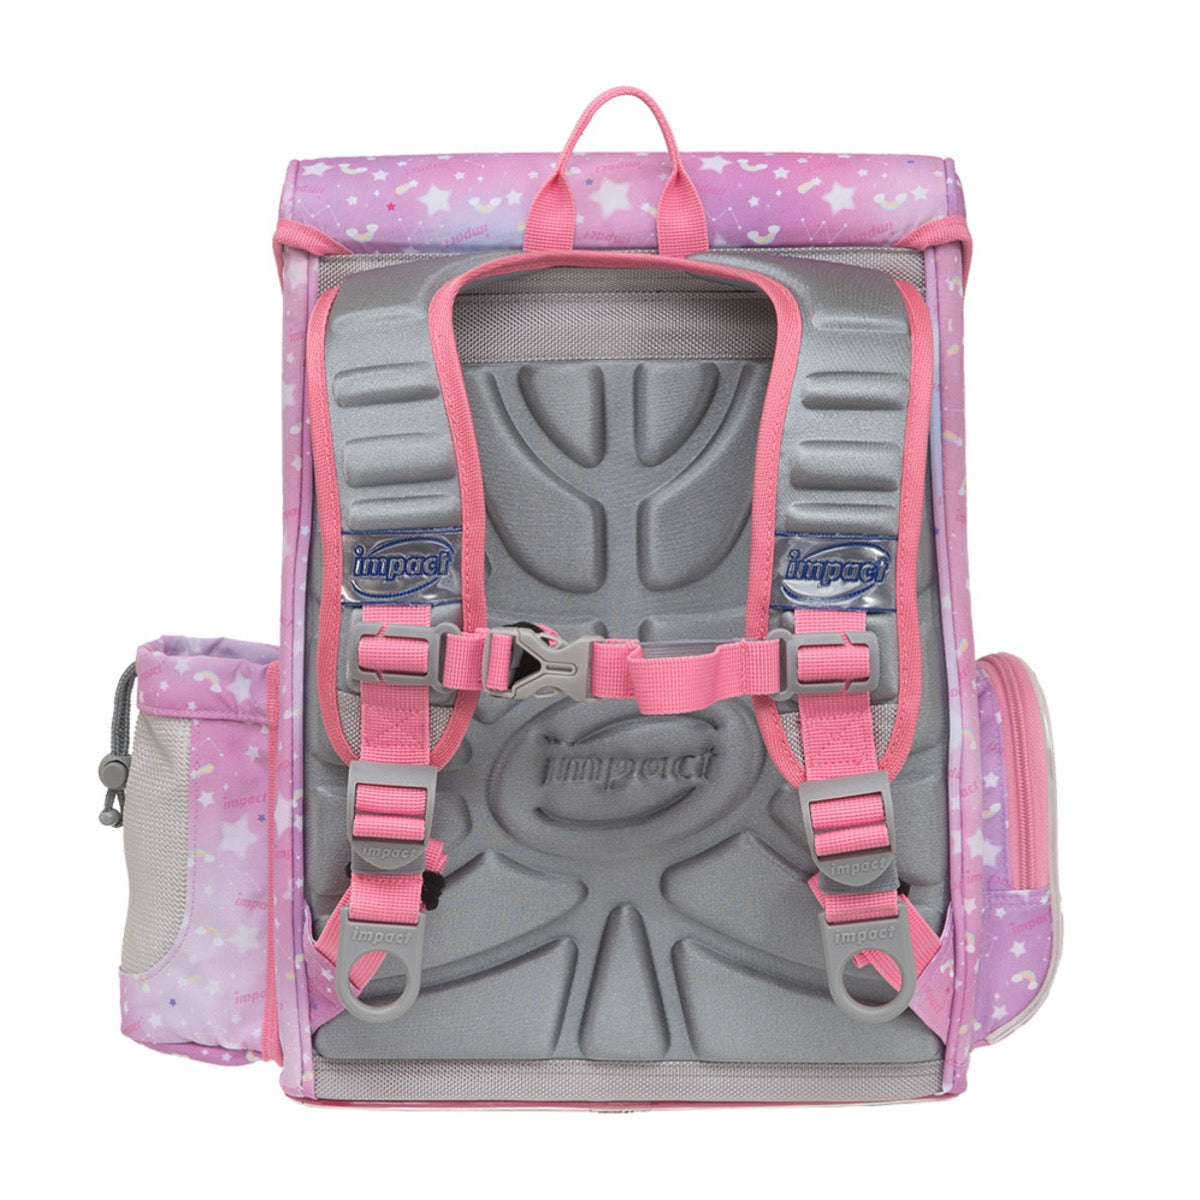 IMPACT - IM-00707-PK - Ergo-Comfort Spinal Support with Magnetic Buckle Backpack